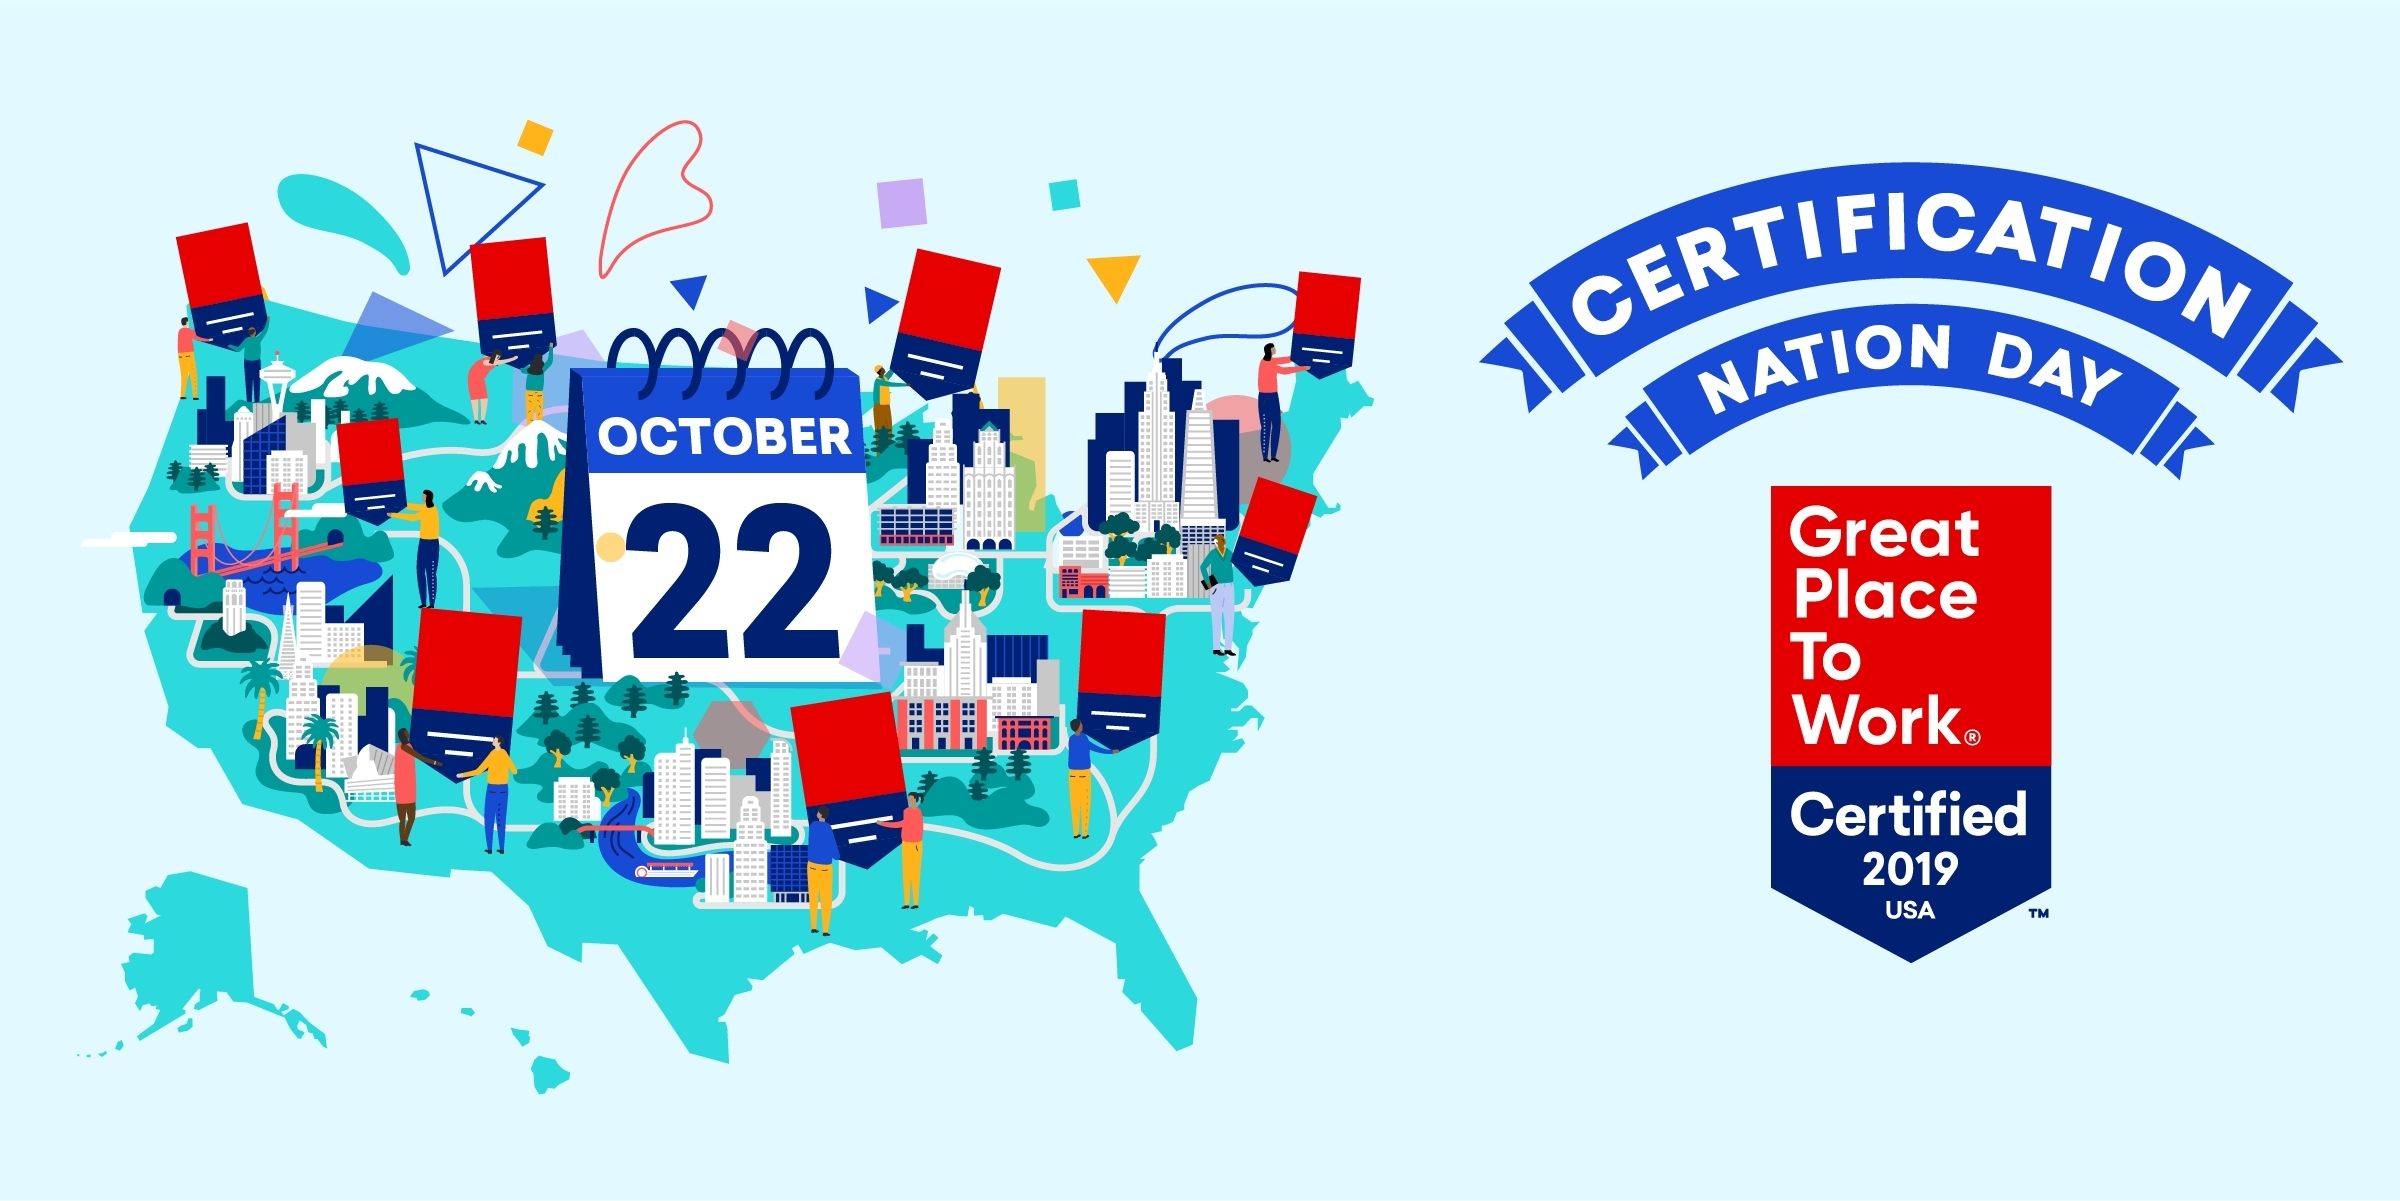 Great Place to Work® Declares October 22nd as Certification Nation Day